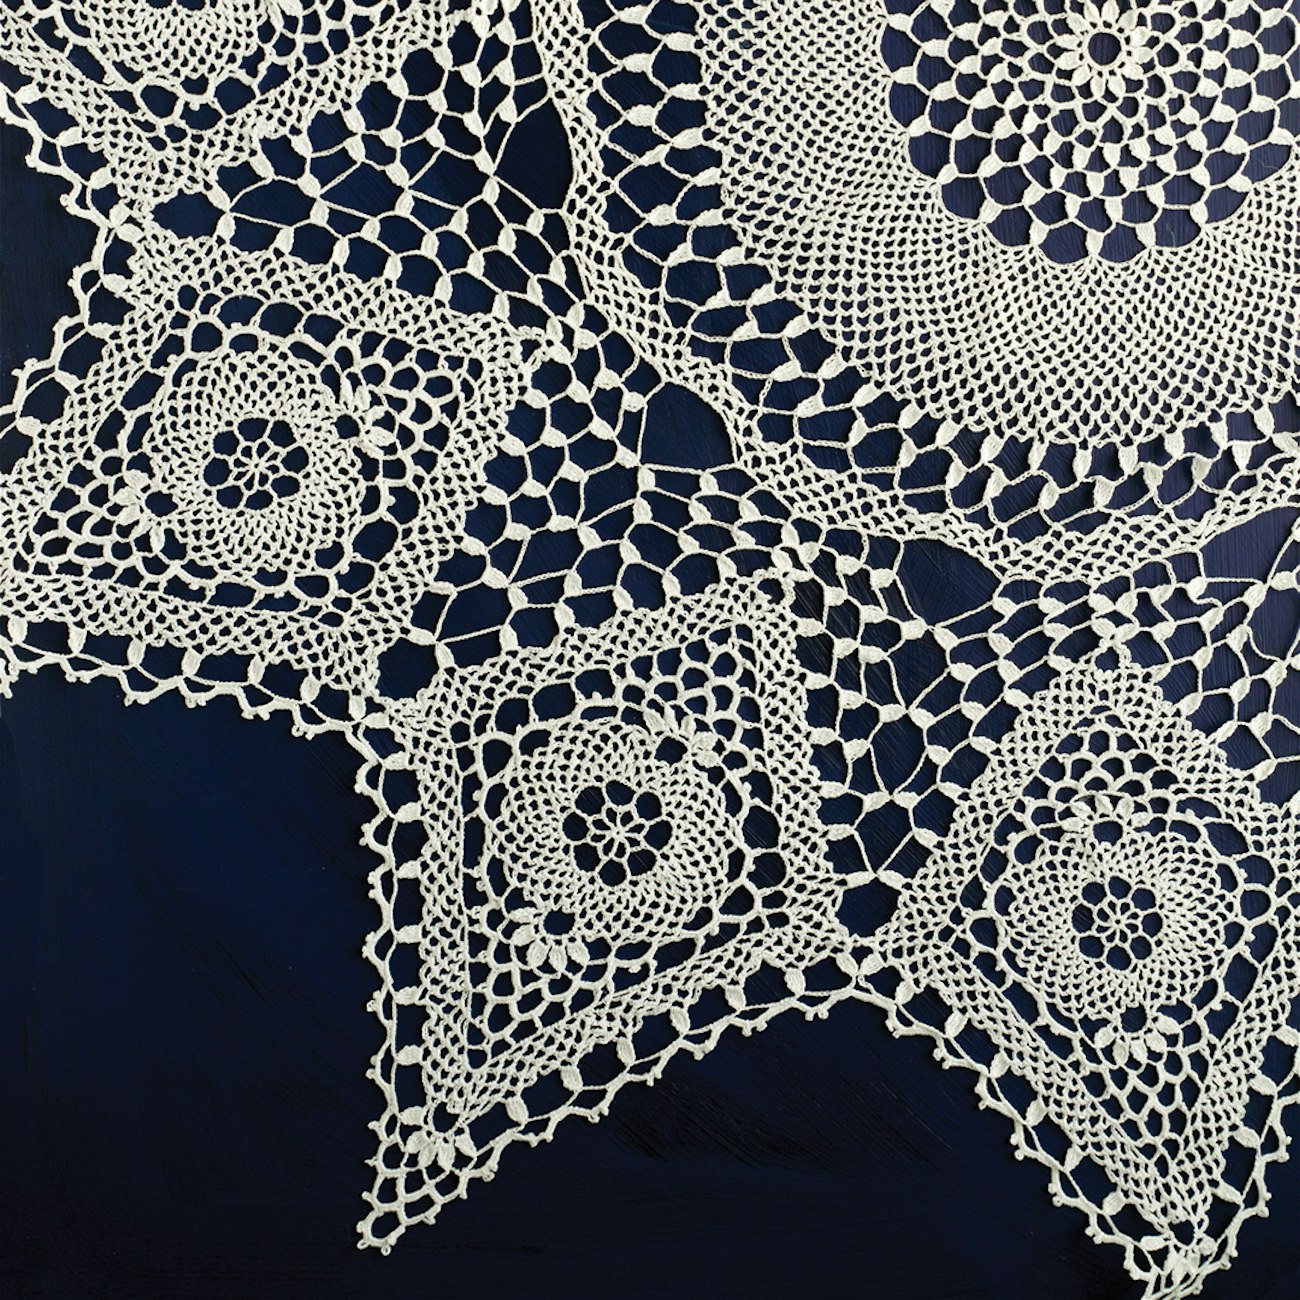 Knots and Loops: Untangling the Structure of Lace